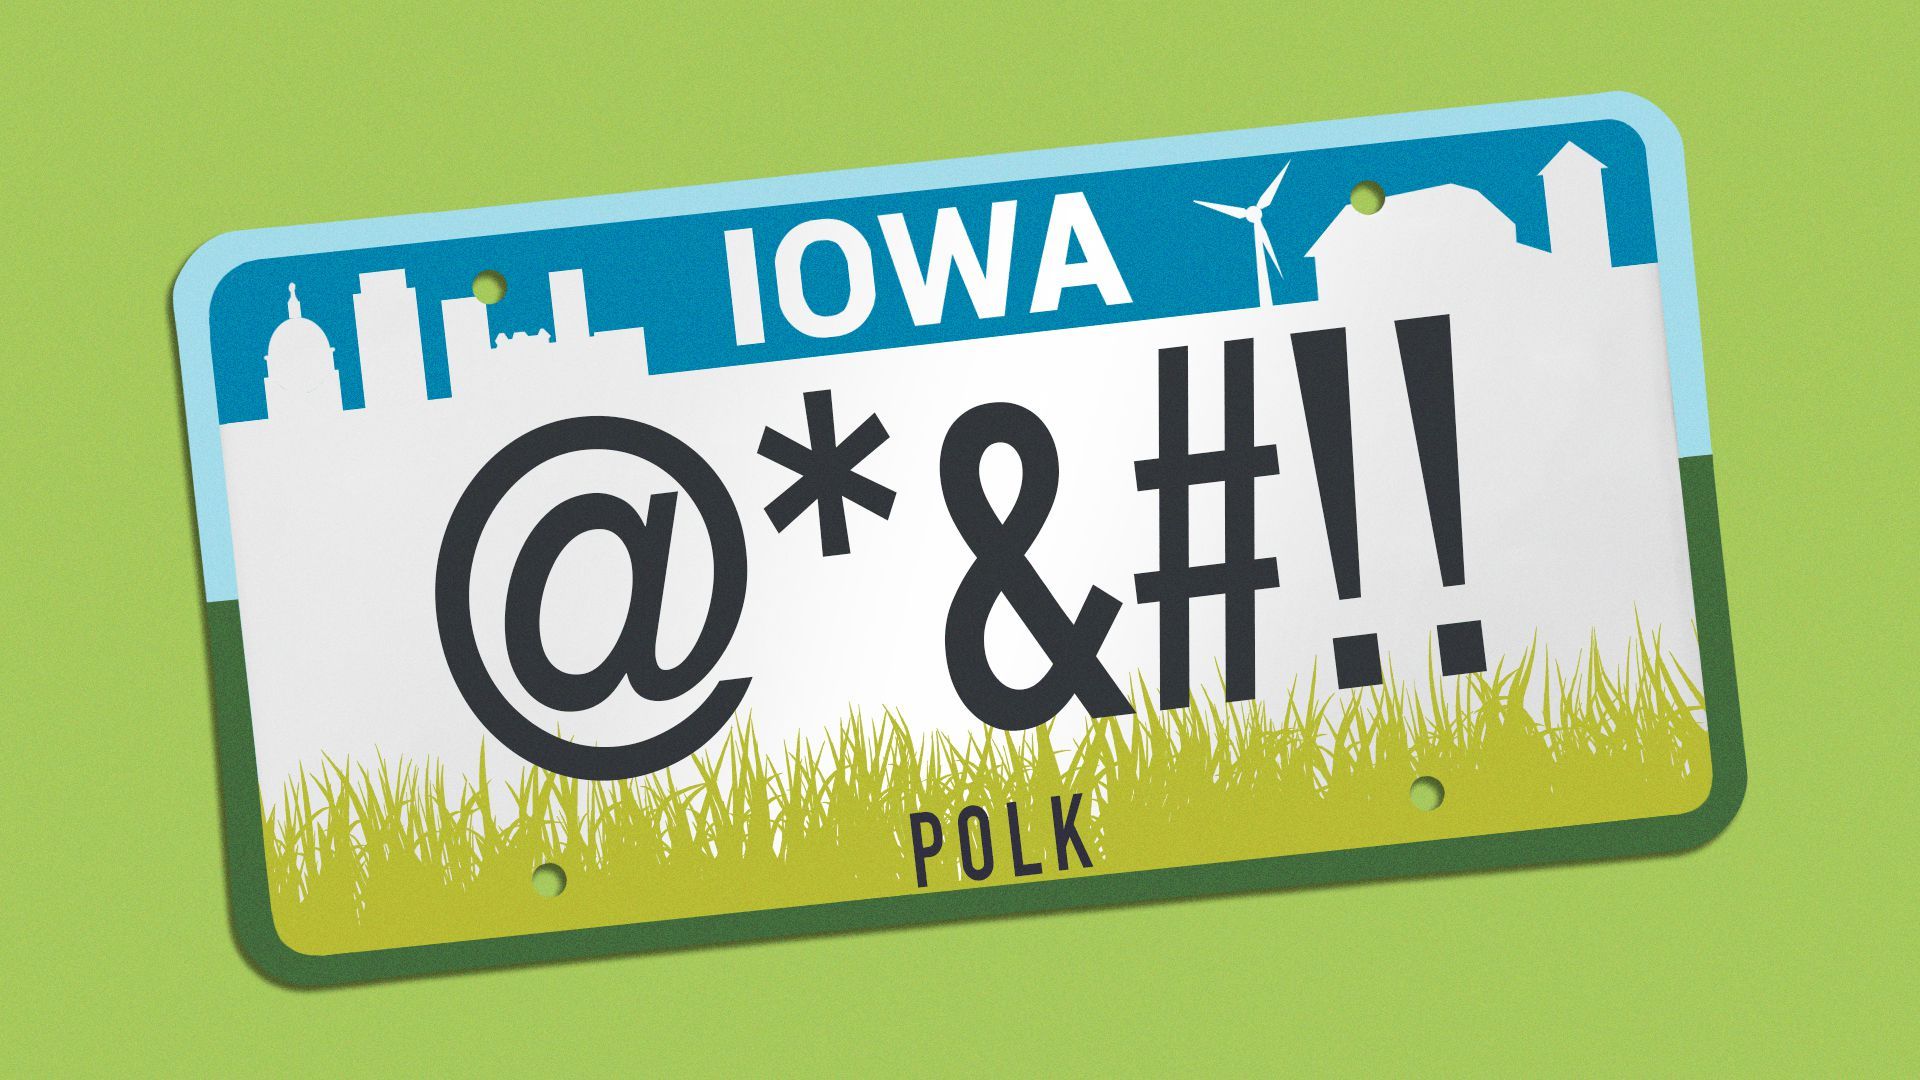 Illustration of the Iowa license plate with symbols implying a swear word.